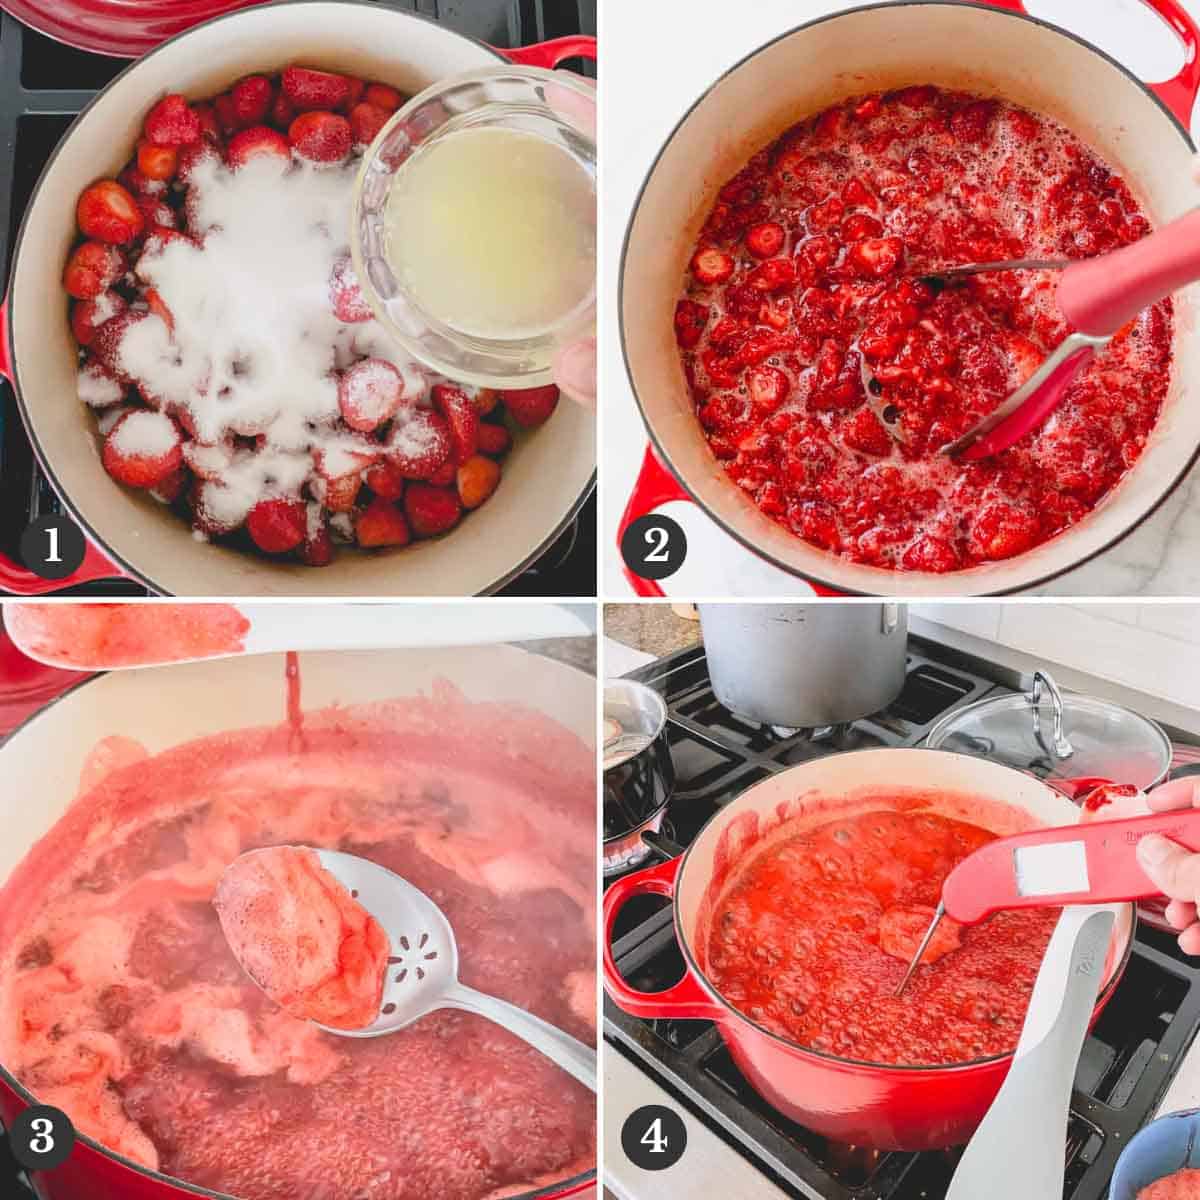 Step by step photos of making strawberry jam in a Dutch oven.